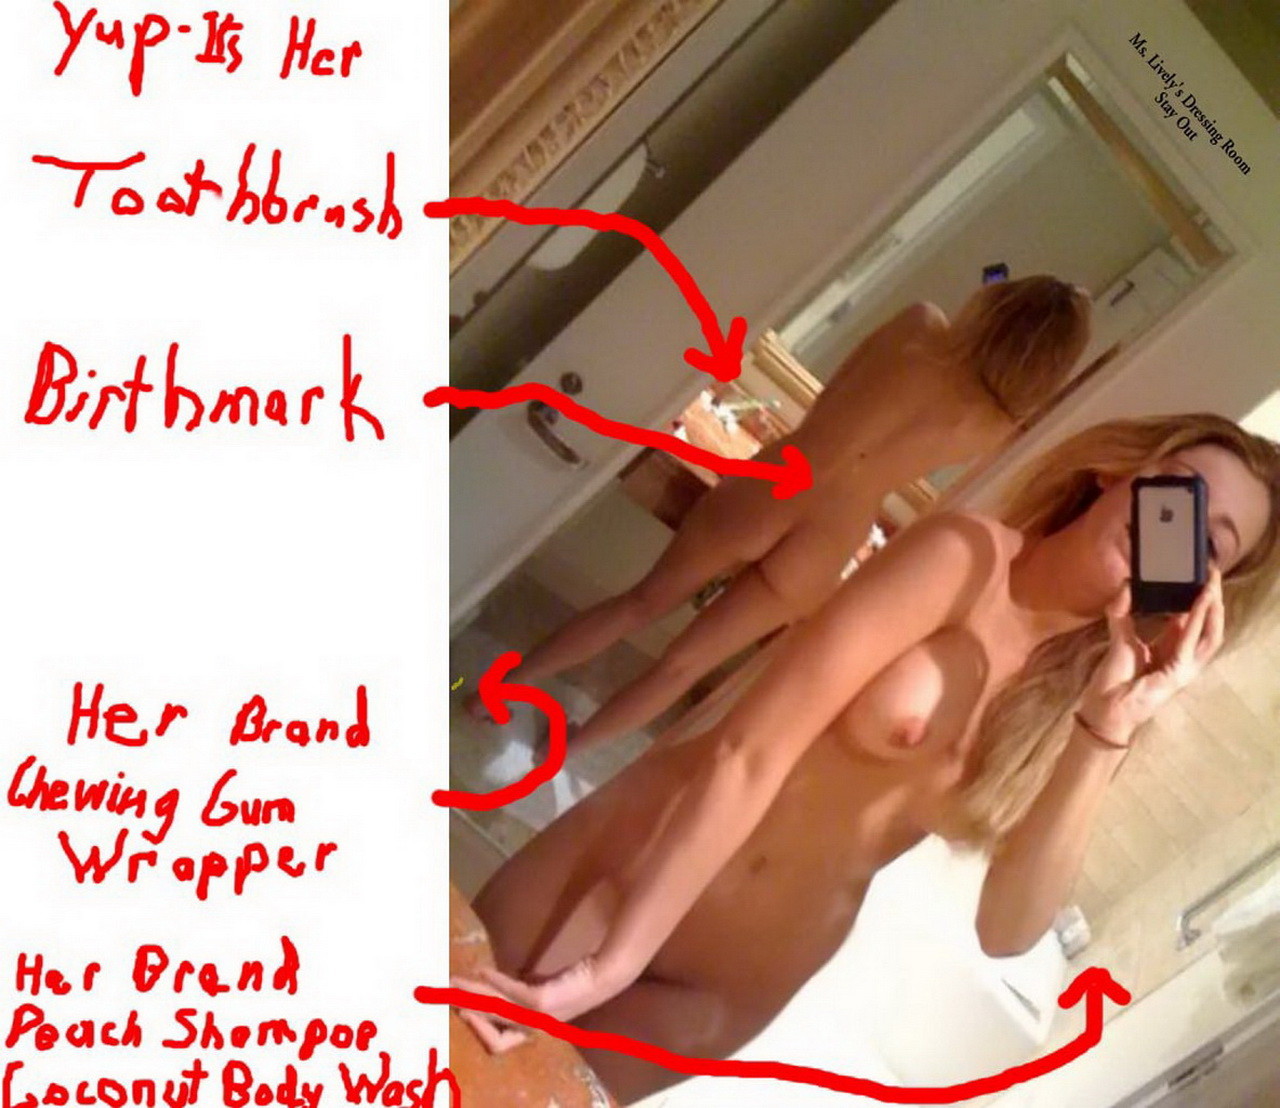 akilah beasley recommends blake lively naked pic